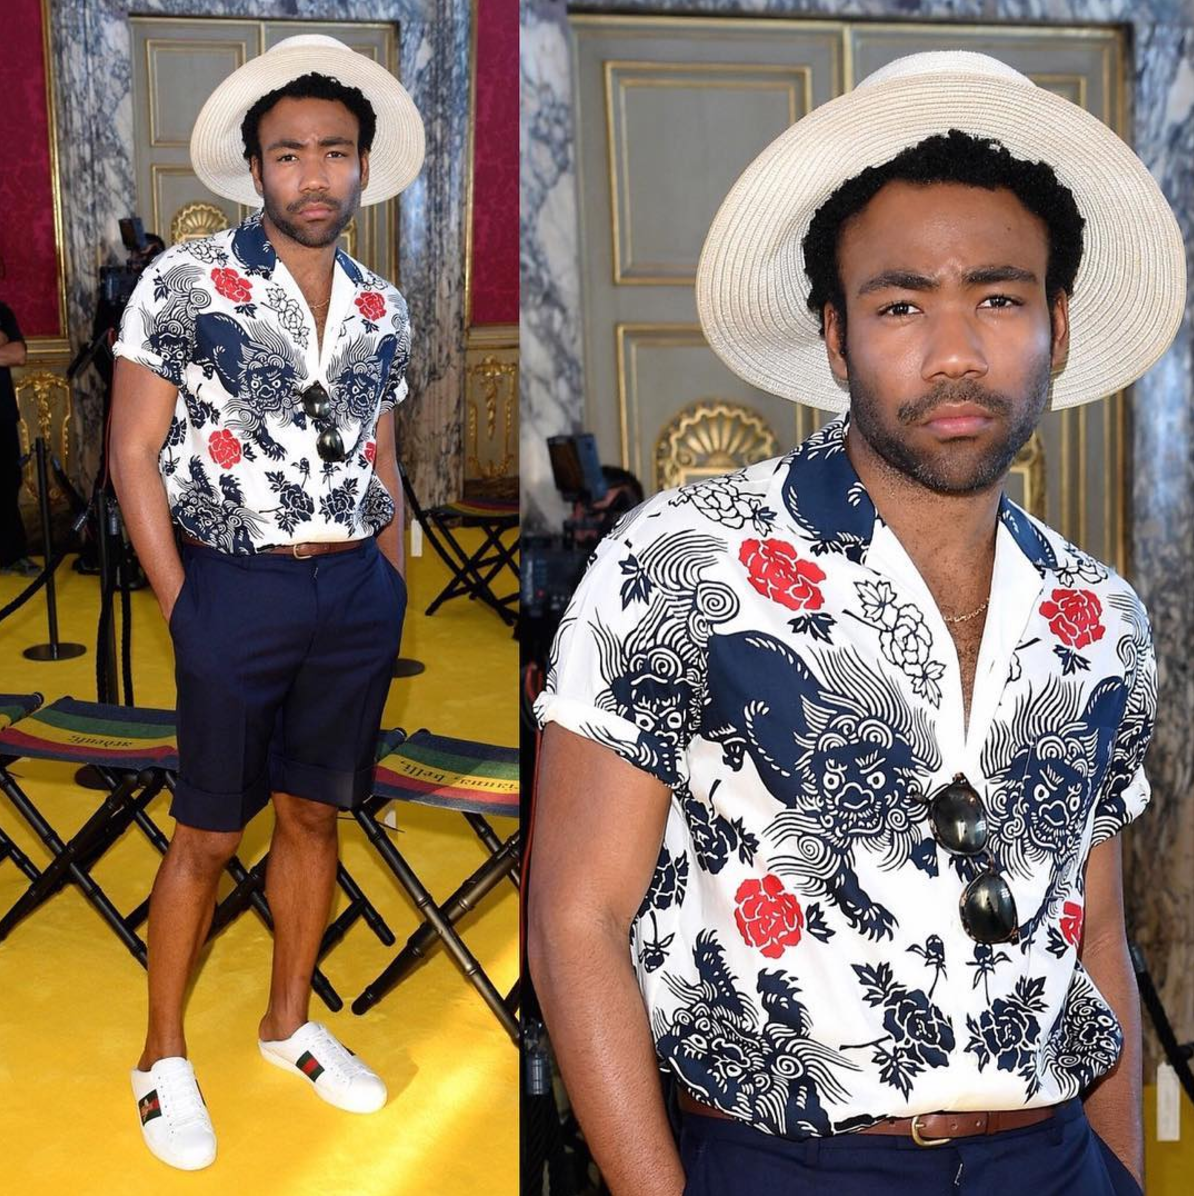 SPOTTED: Childish Gambino in Gucci At Florence